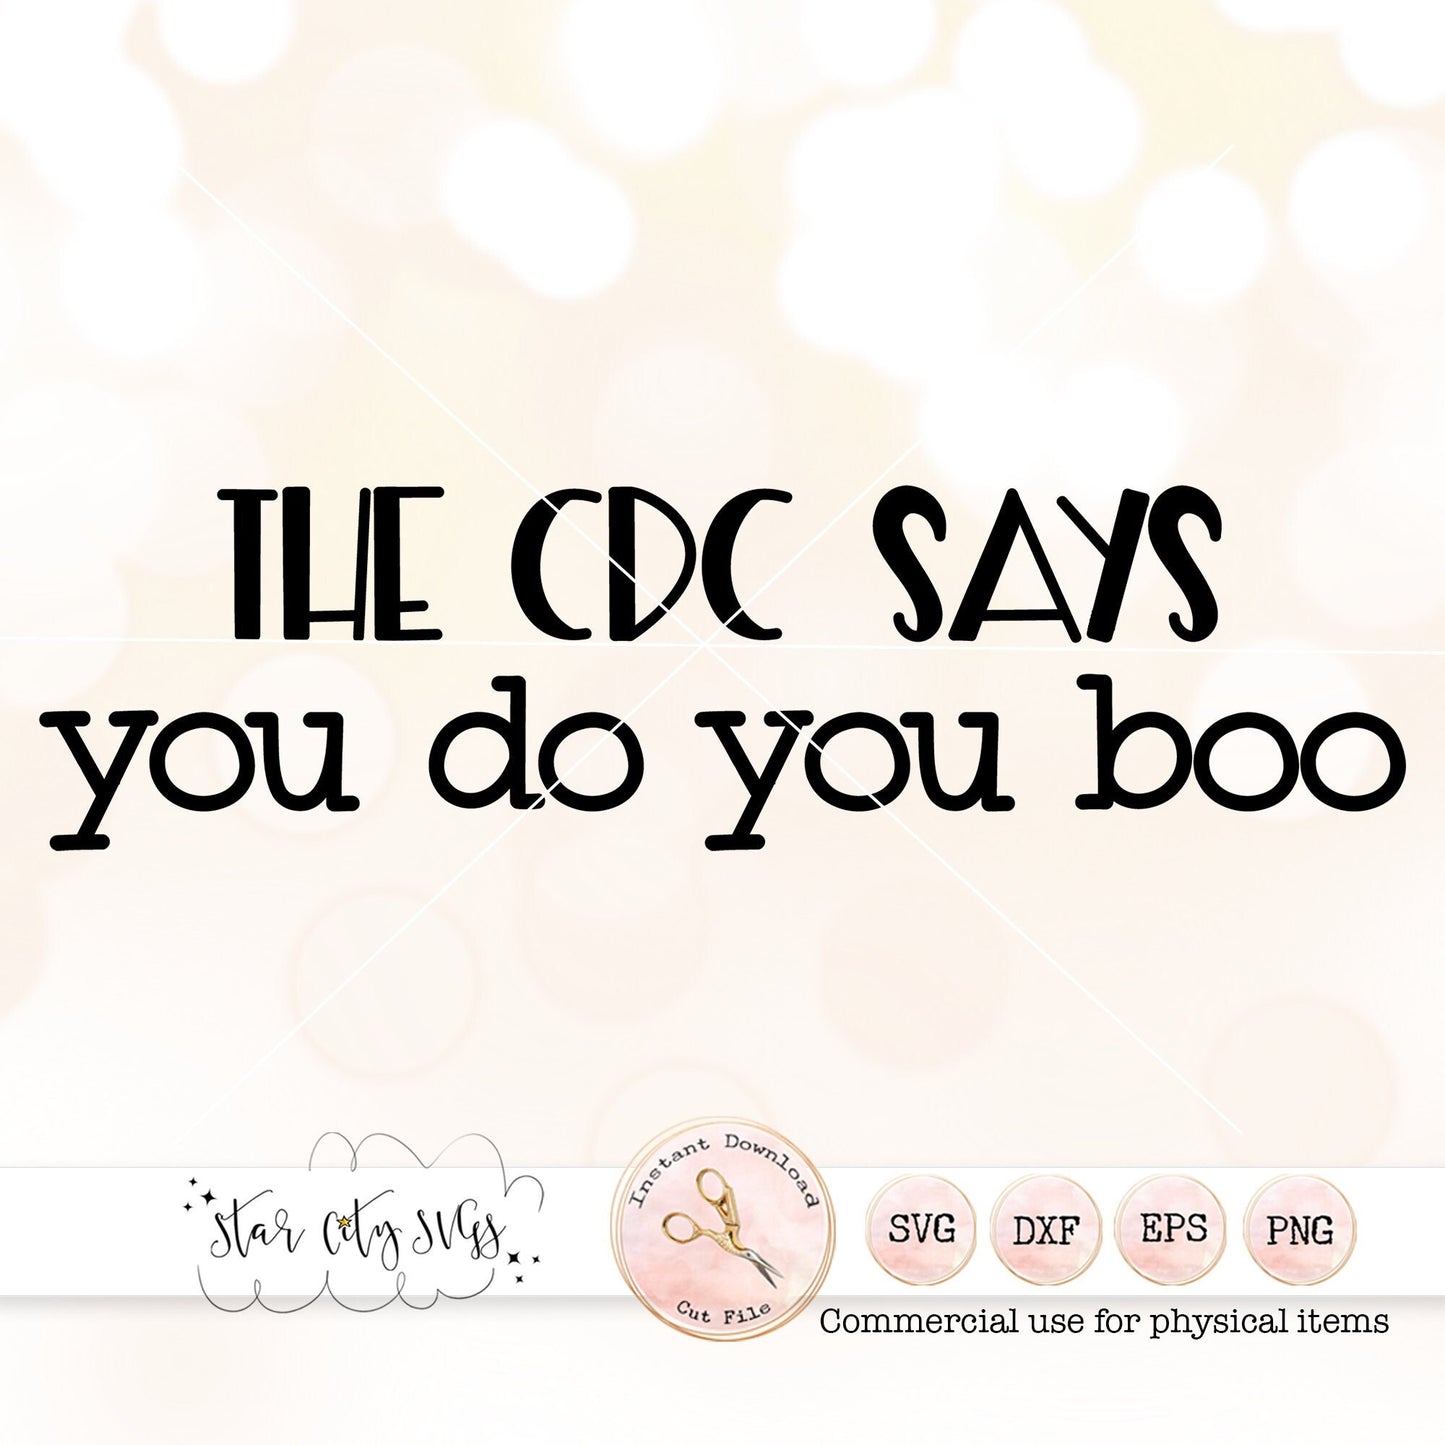 The CDC says you do you boo SVG